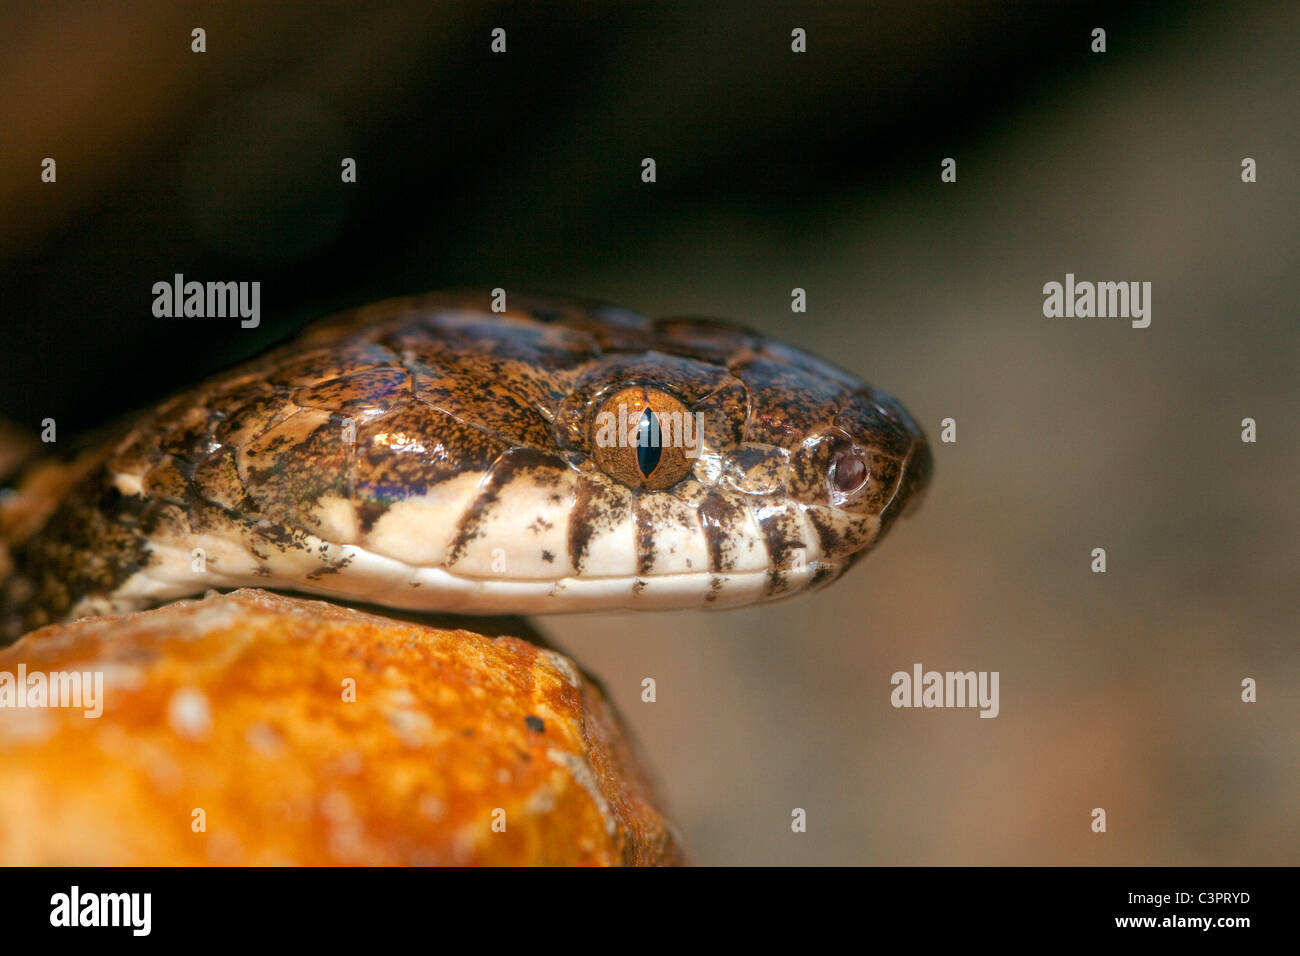 A close-up view of a venomous side striped palm-pitviper (Bothriechis lateralis) in Costa Rica. Stock Photo